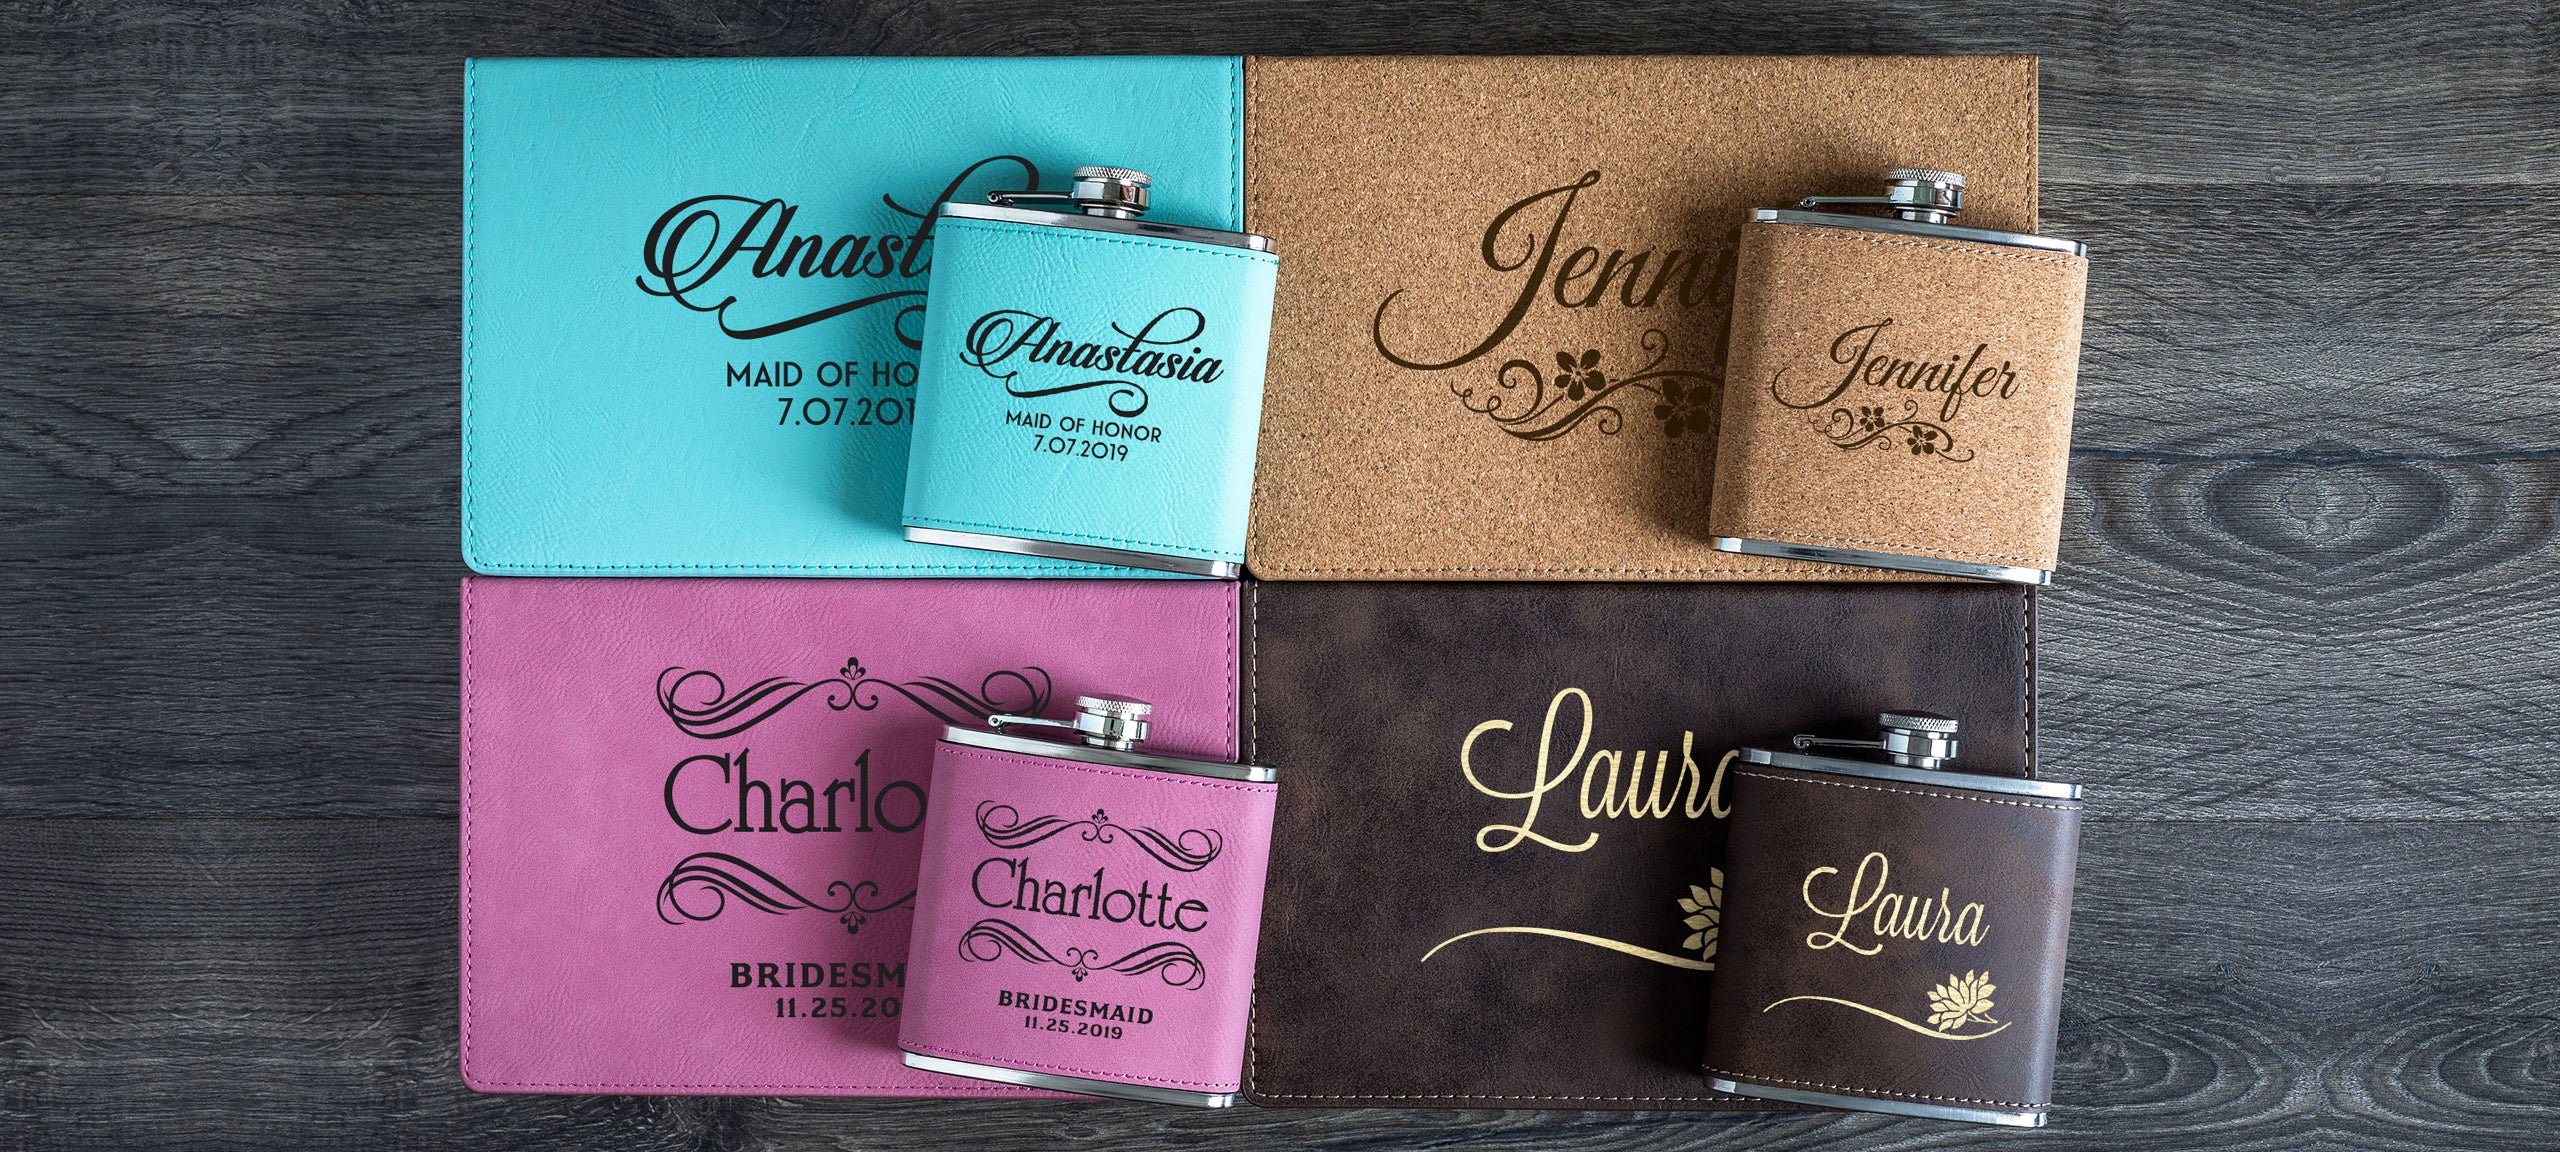 personalized leather flask